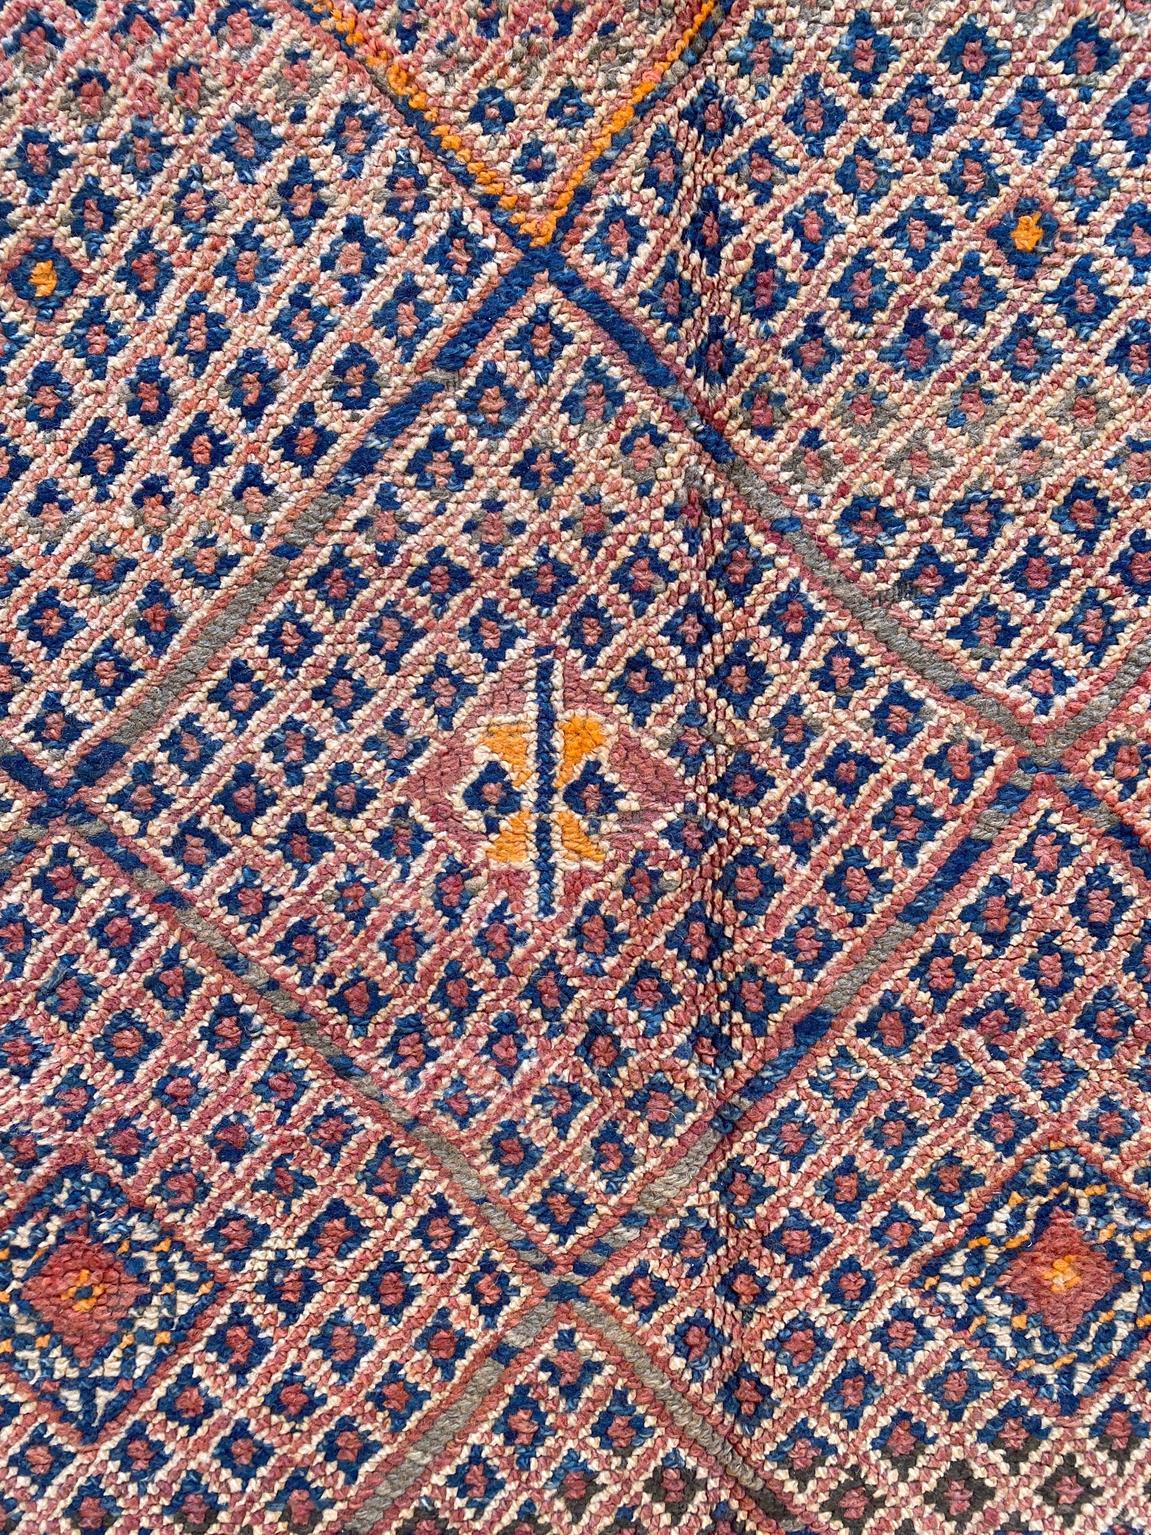 Vintage Beni Mguild rug - Orange/terracotta/blue - 6.1x9.8feet / 186x298cm In Good Condition For Sale In Marrakech, MA